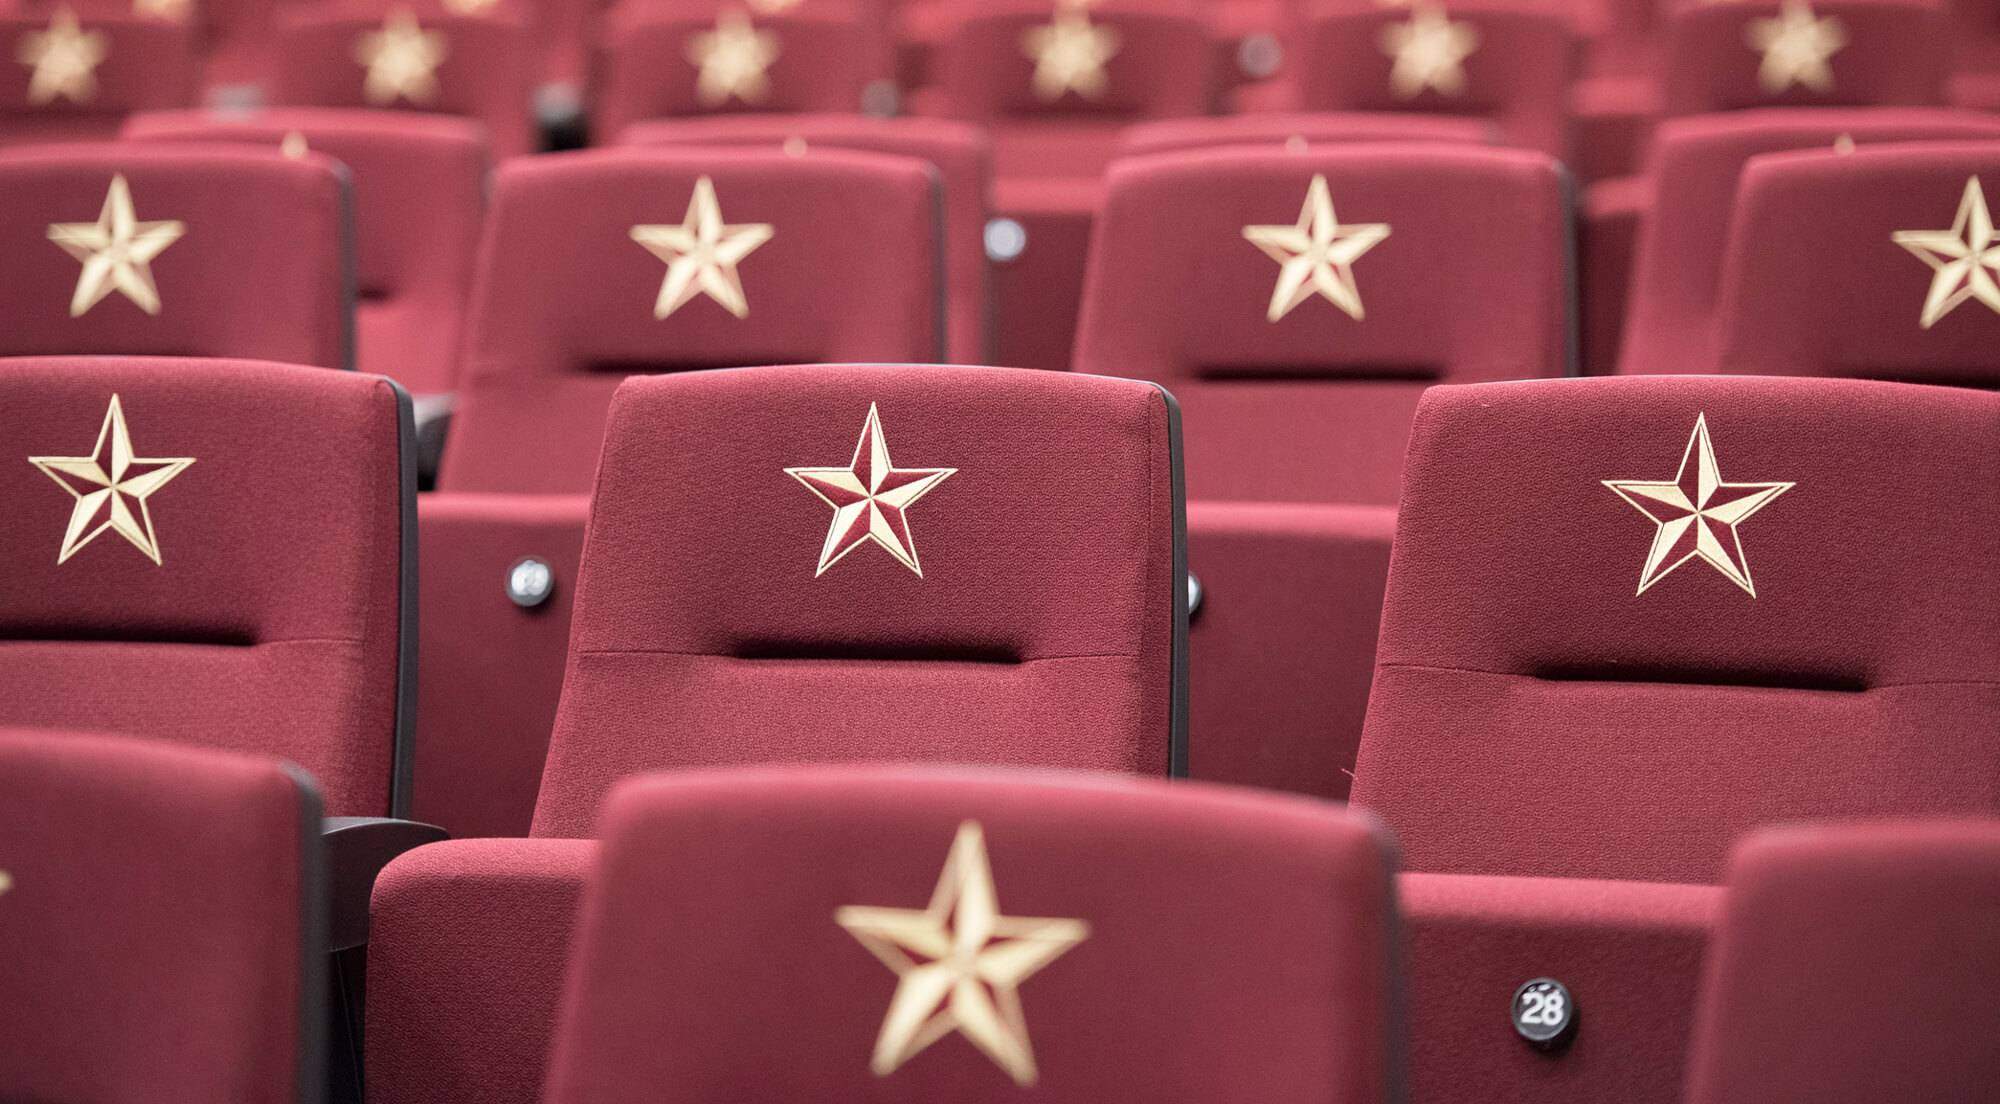 Maroon chairs with single gold star on each chair